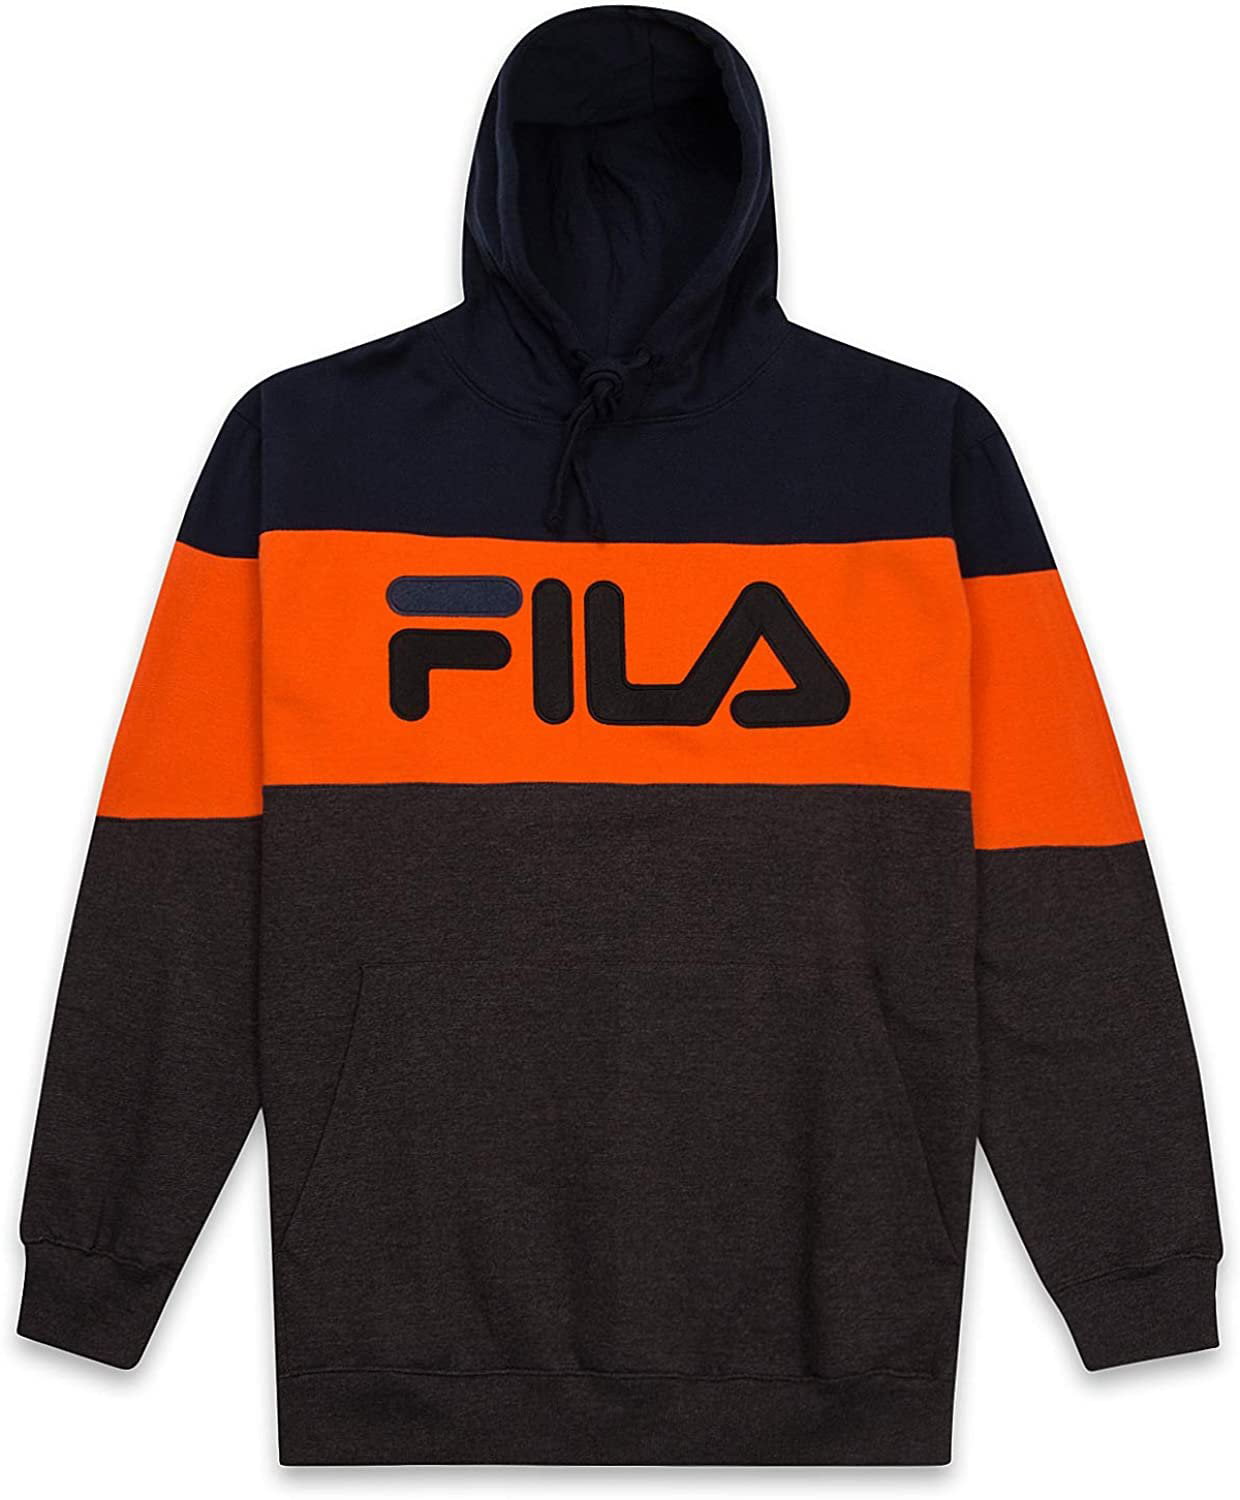 Men's Big and Tall Colorblock Pullover Hoodie Navy Charcoal Heather Orange